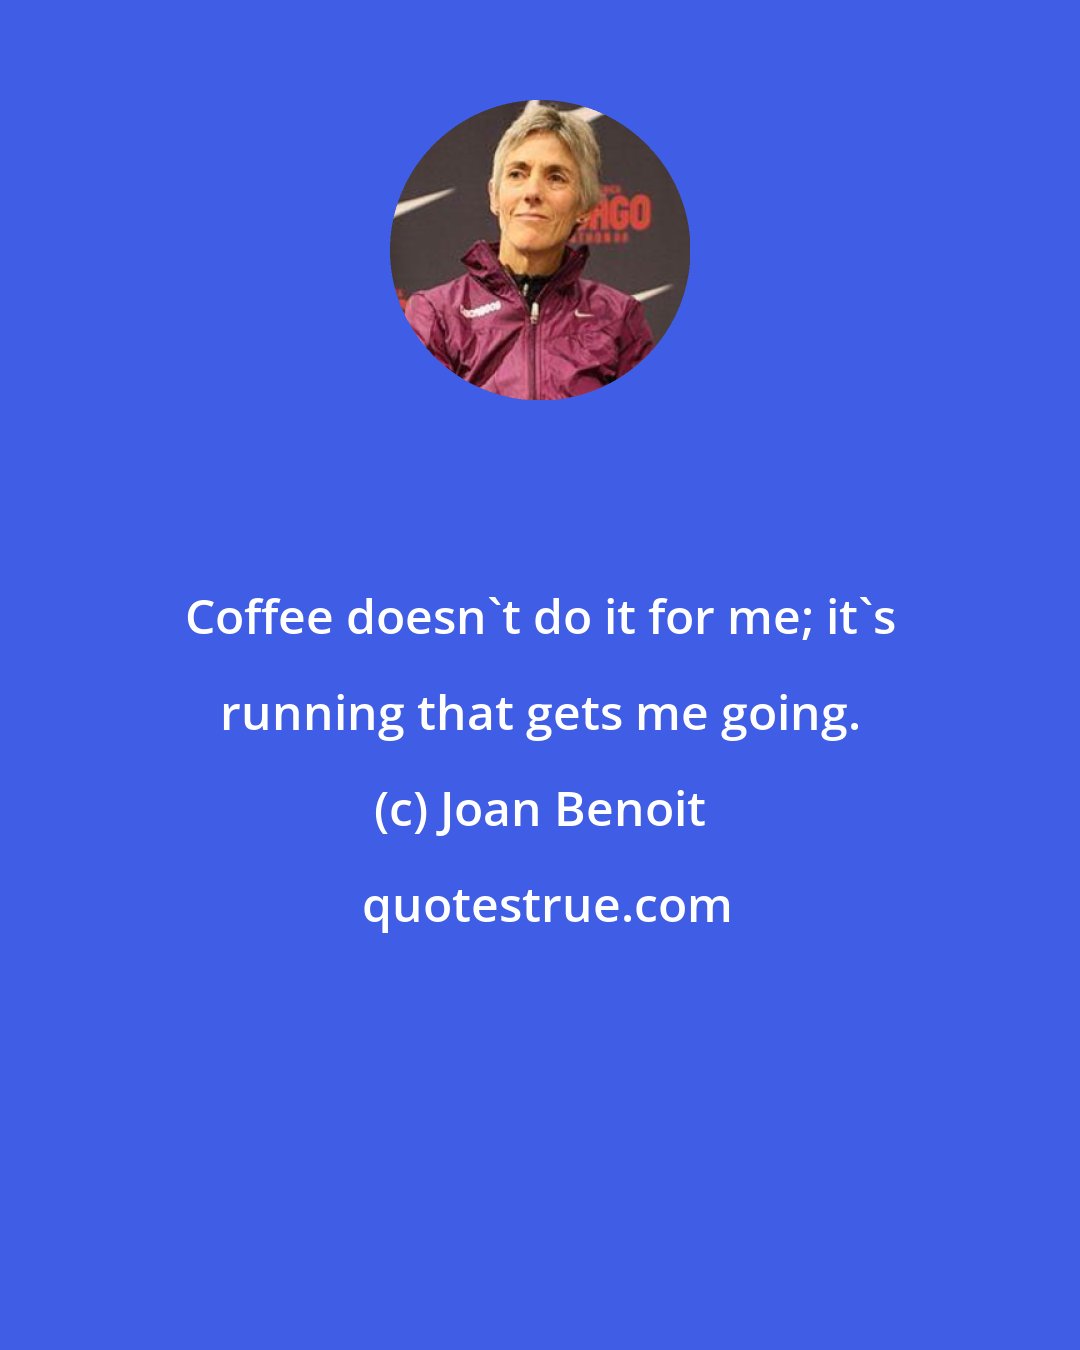 Joan Benoit: Coffee doesn't do it for me; it's running that gets me going.